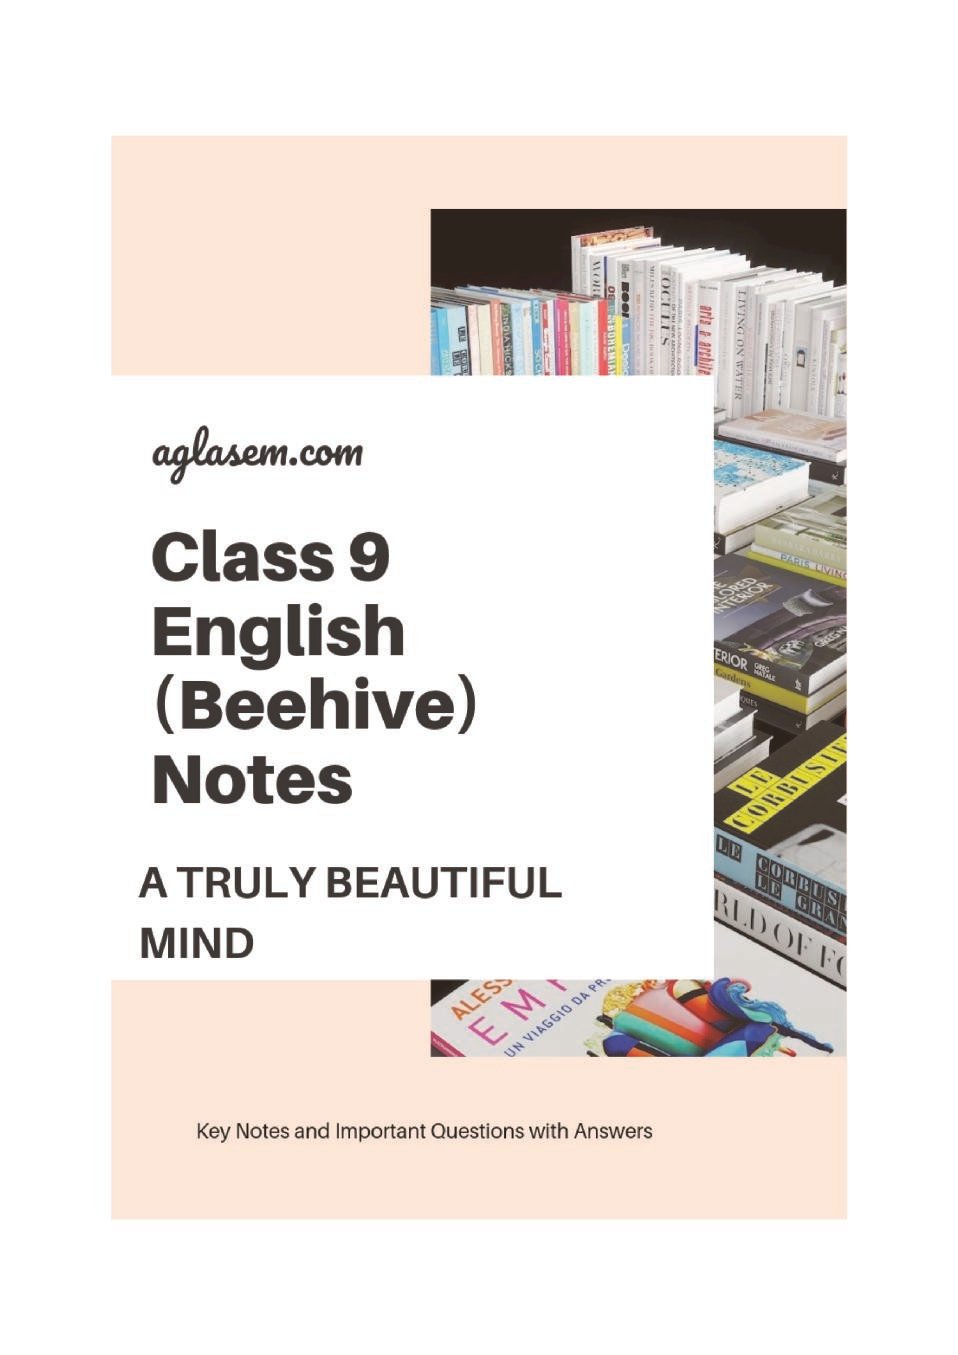 Class 9 English Beehive Notes For A Truly Beautiful Mind - Page 1